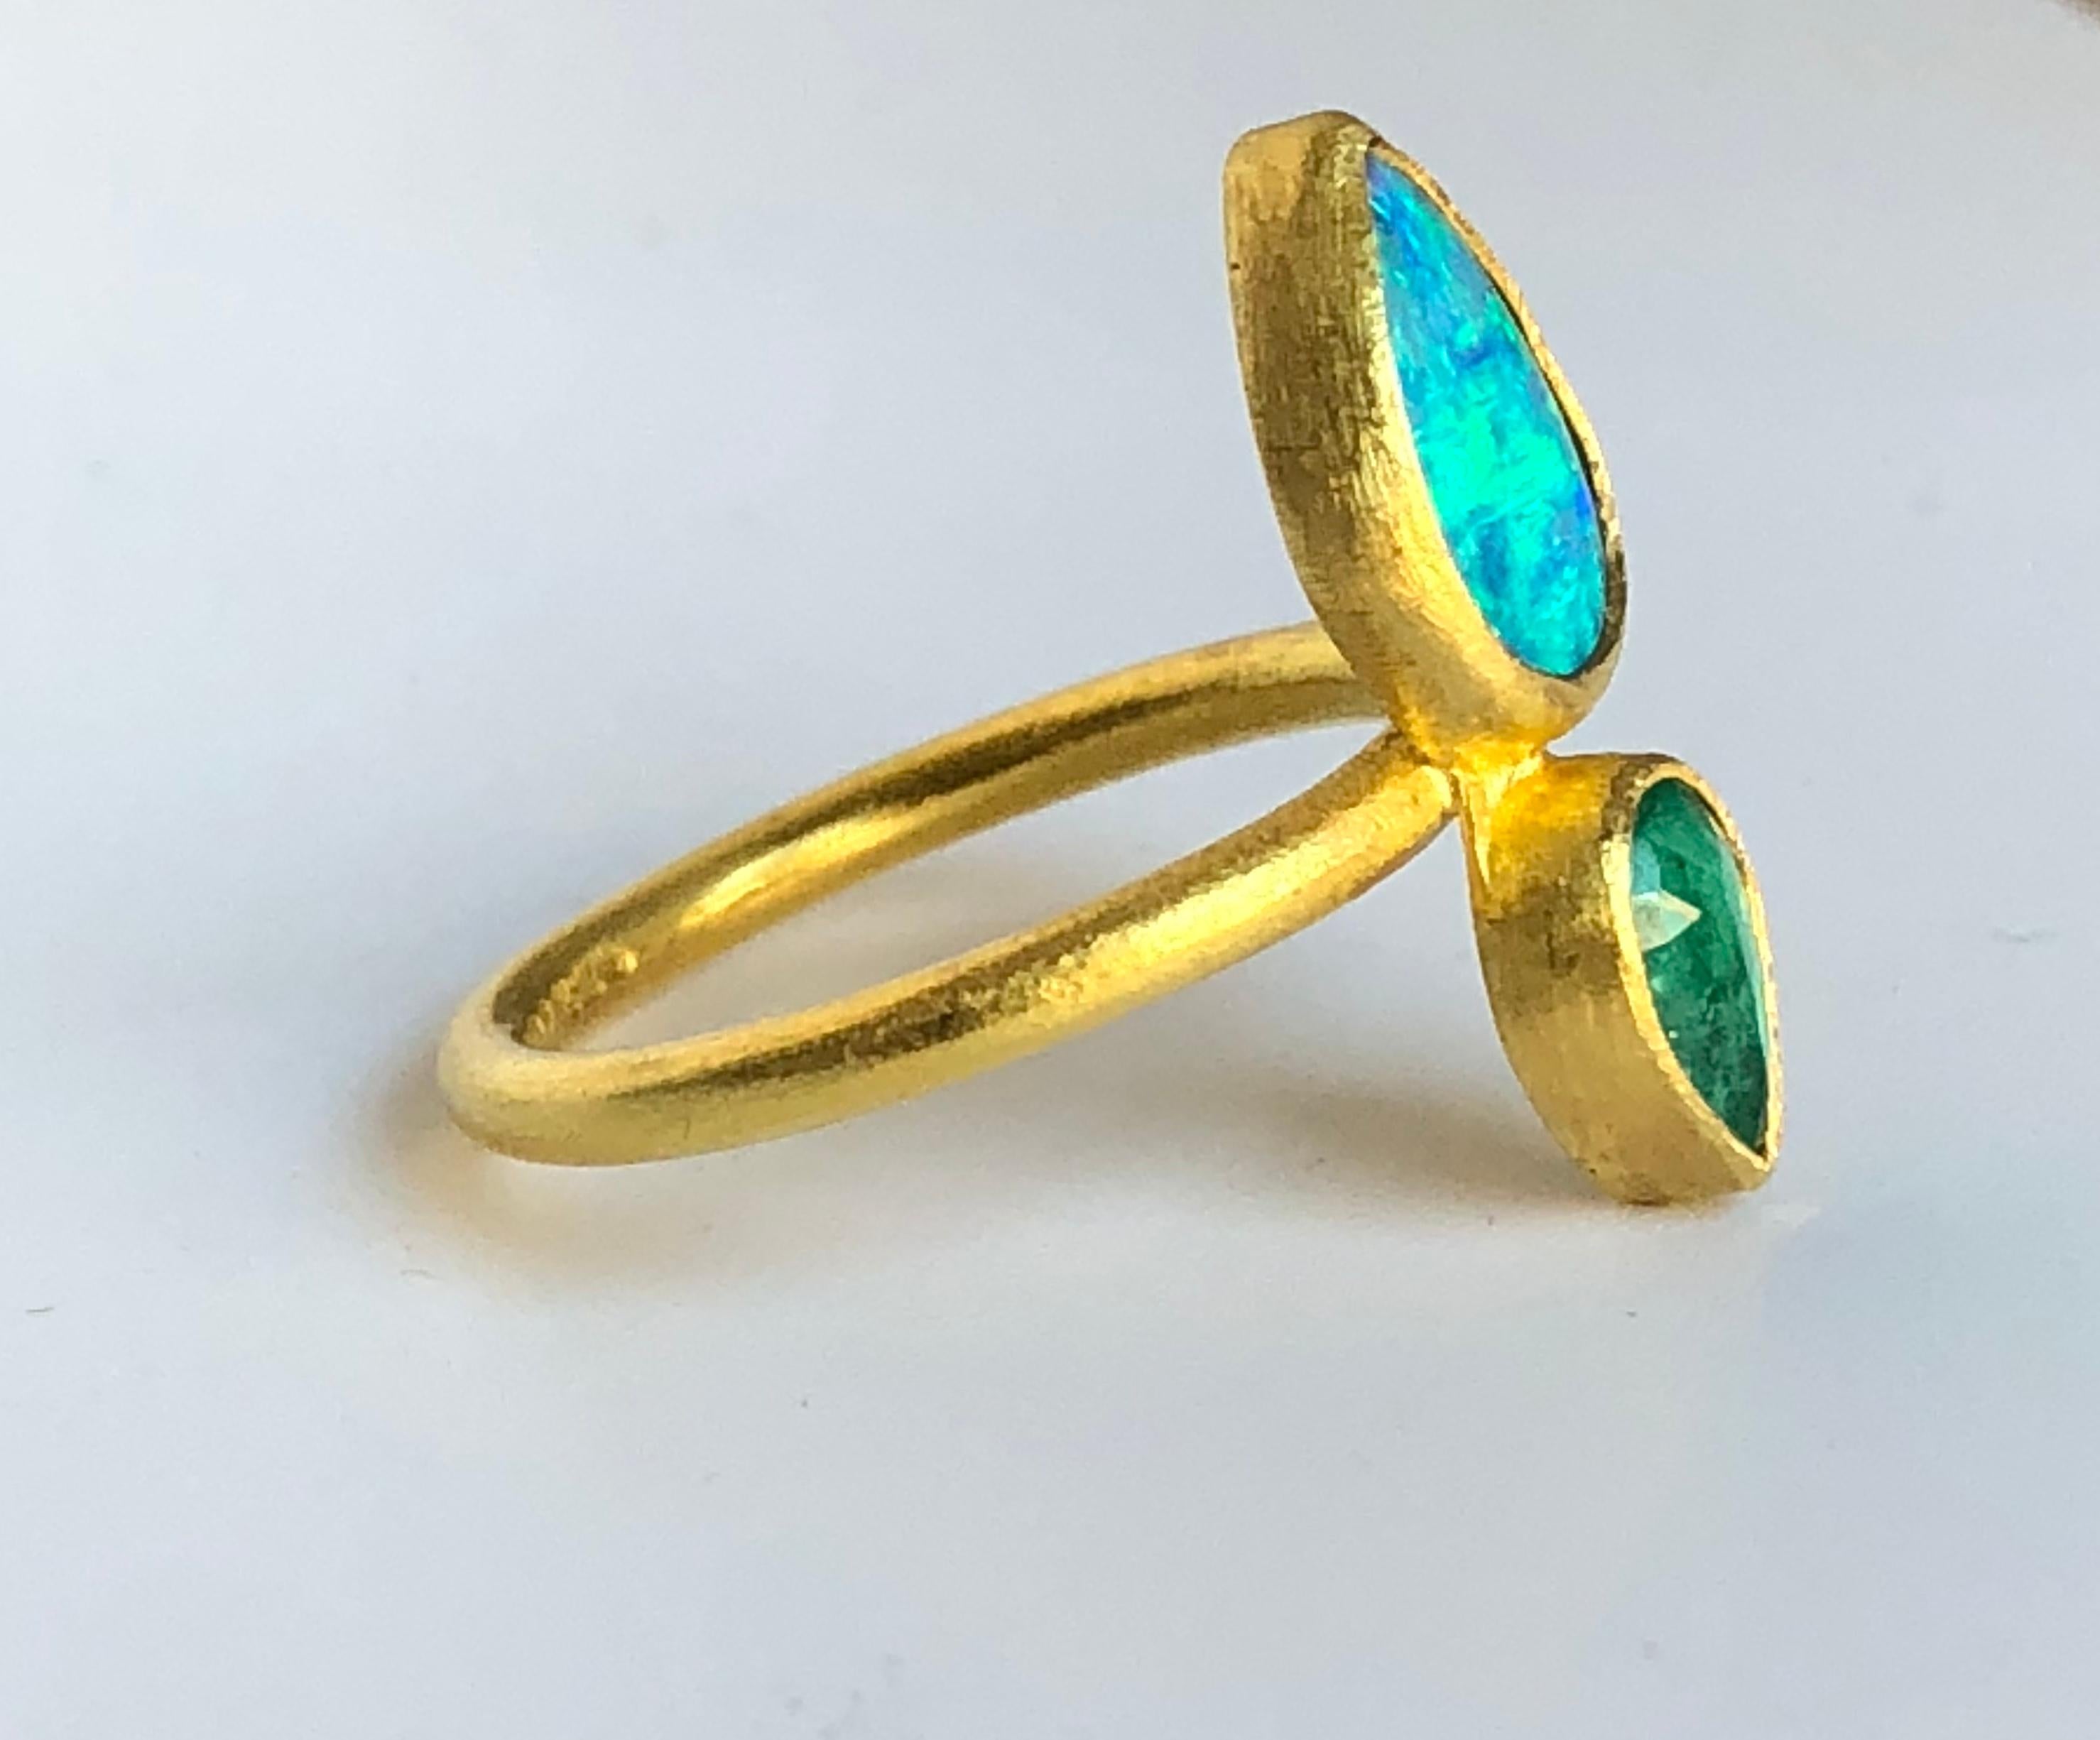 Handcrafted double stone ring by Stephanie Albertson featuring a .45 ct rose cut Zambian emerald and a brilliant blue Australian crystal opal in 22k gold. Size 7. Can be sized. 